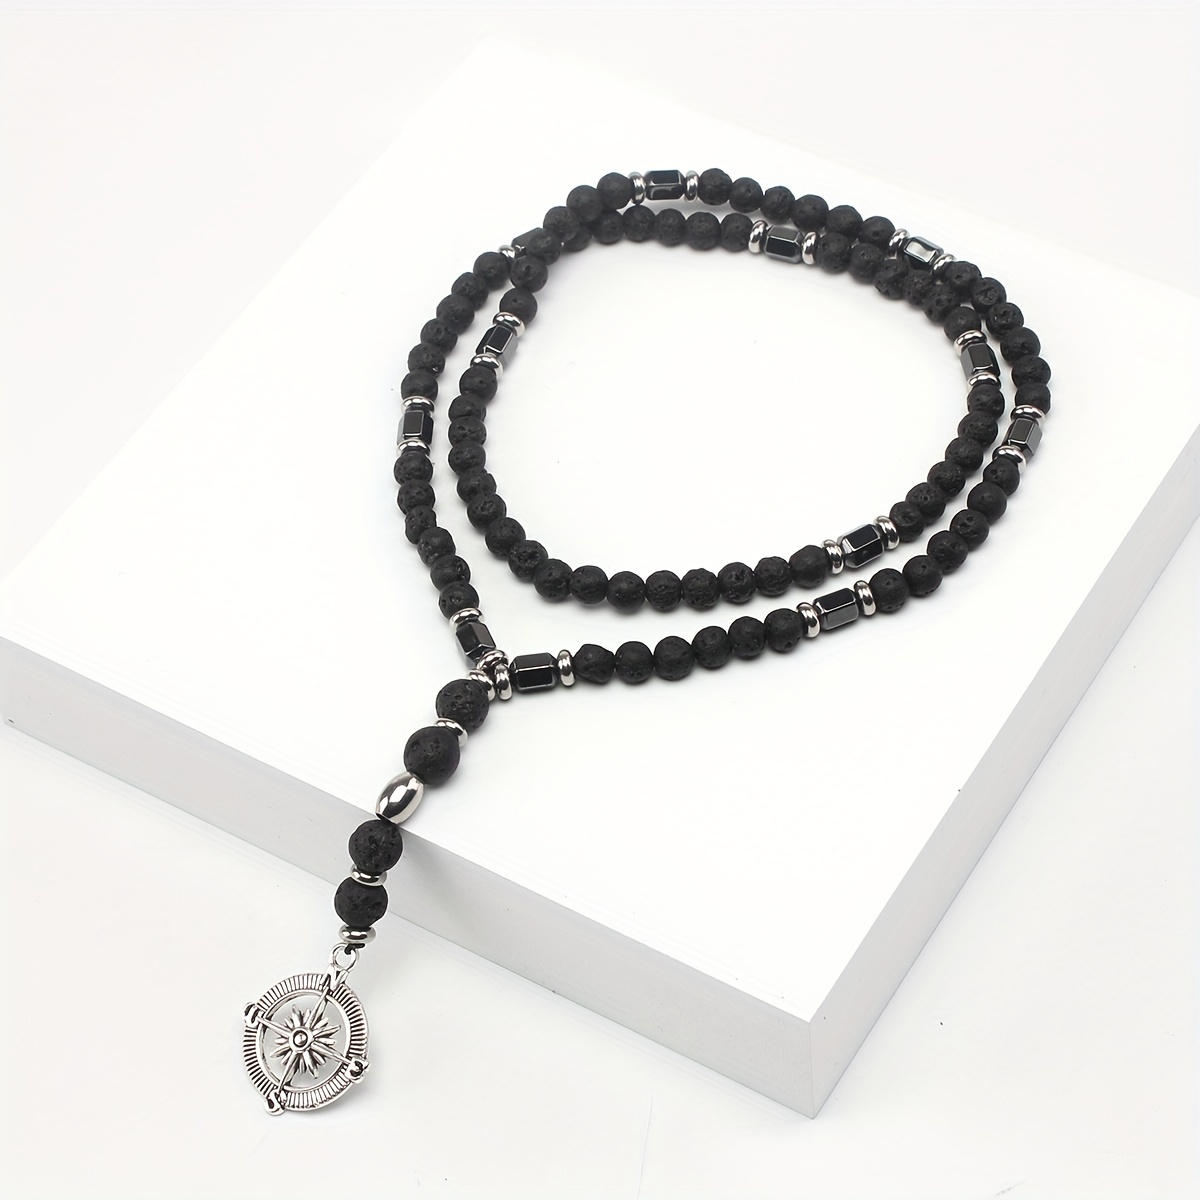 Stainless Steel Mens Bead Necklace Natural Stone Necklaces Black